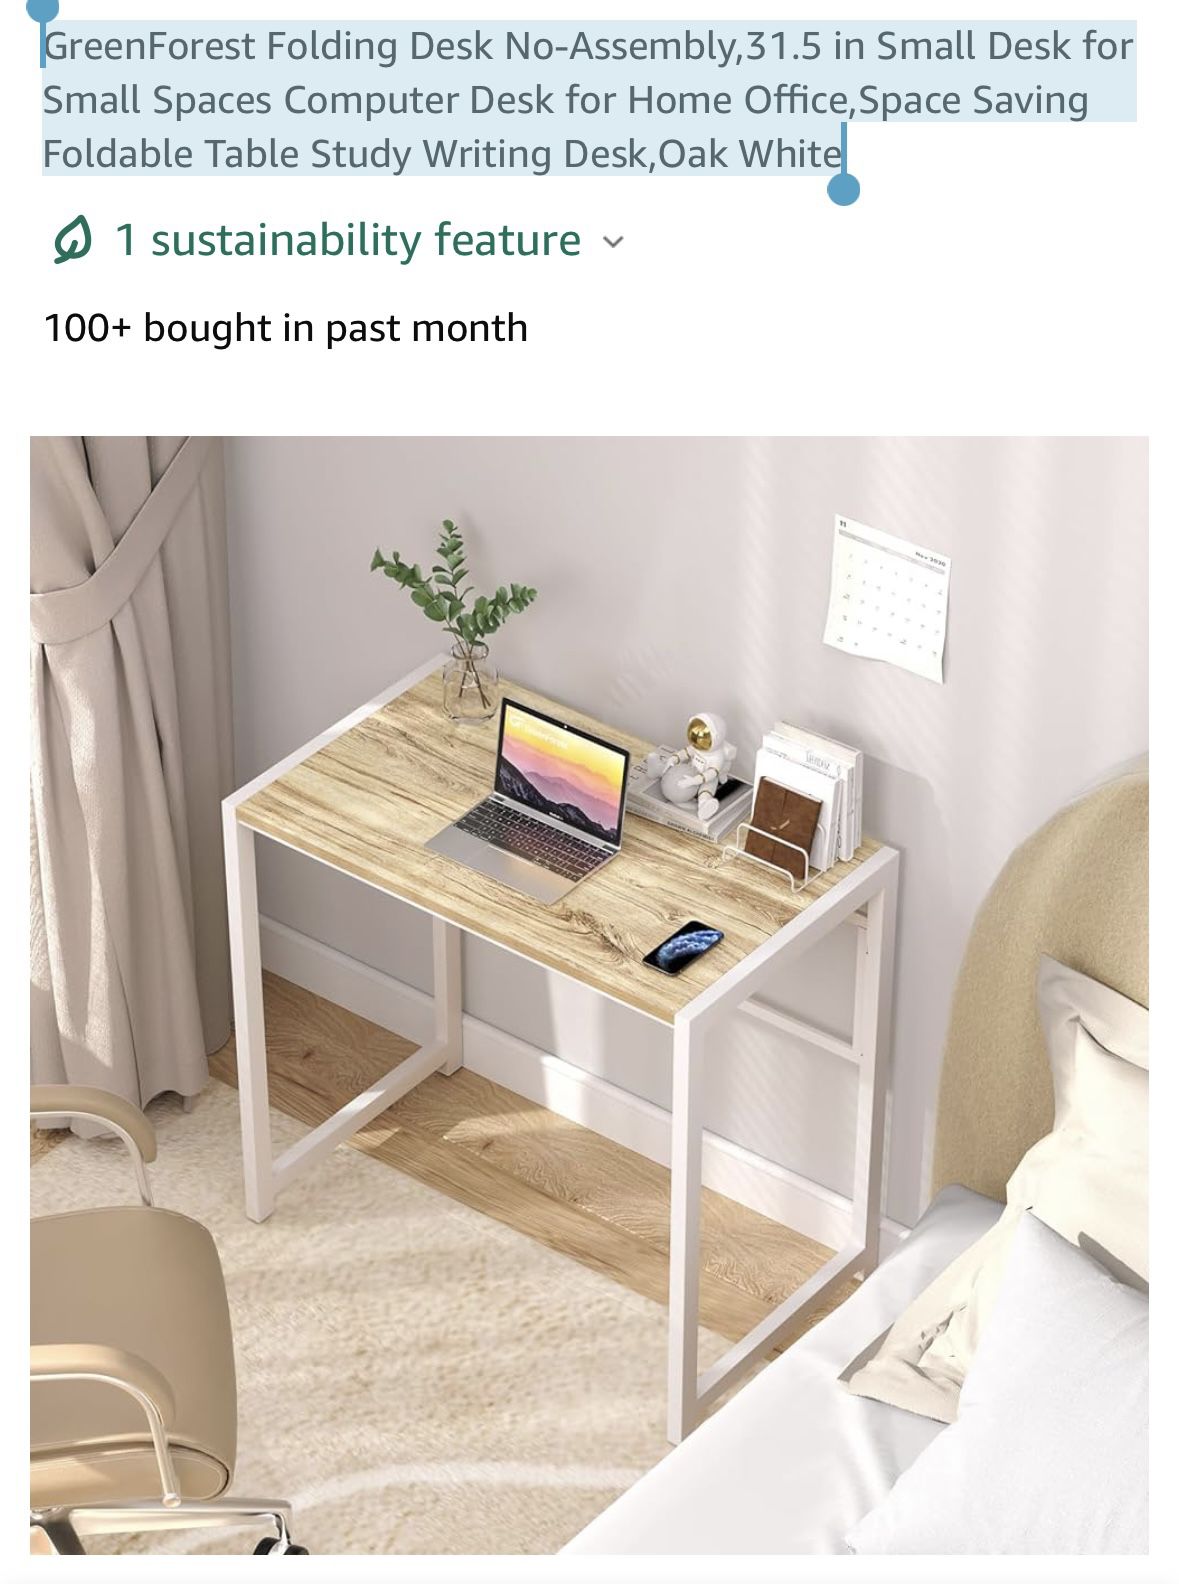 GreenForest Folding Desk No-Assembly,31.5 in Small Desk for Small Spaces Computer Desk for Home 